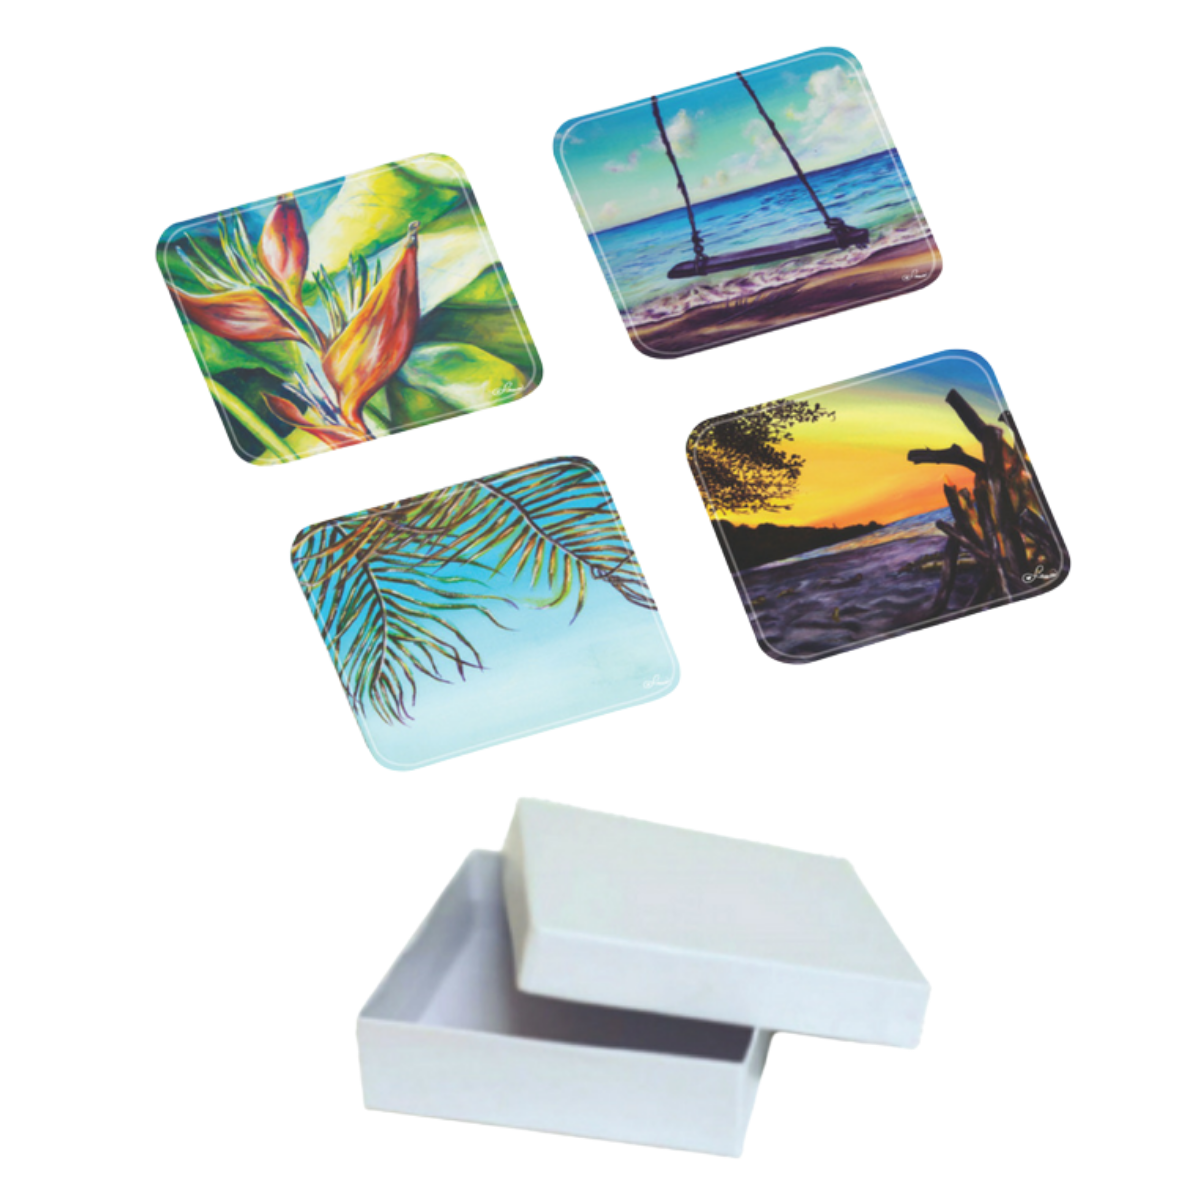 L. Garcia – 4PC Acrylic Coaster Set in Gift Box – Assorted